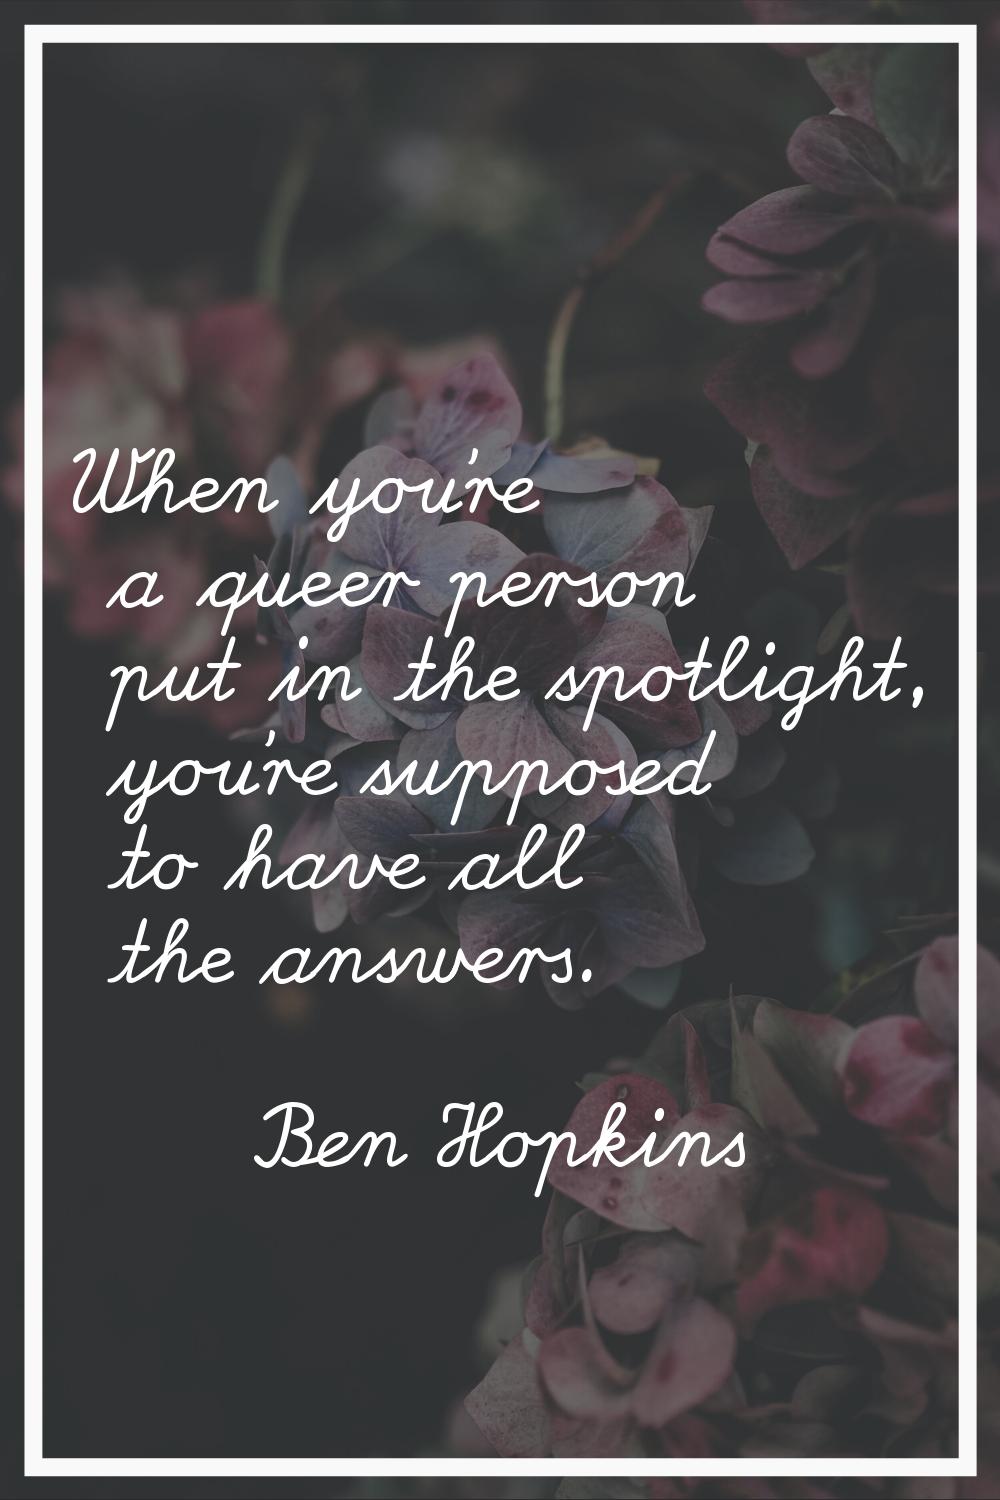 When you're a queer person put in the spotlight, you're supposed to have all the answers.